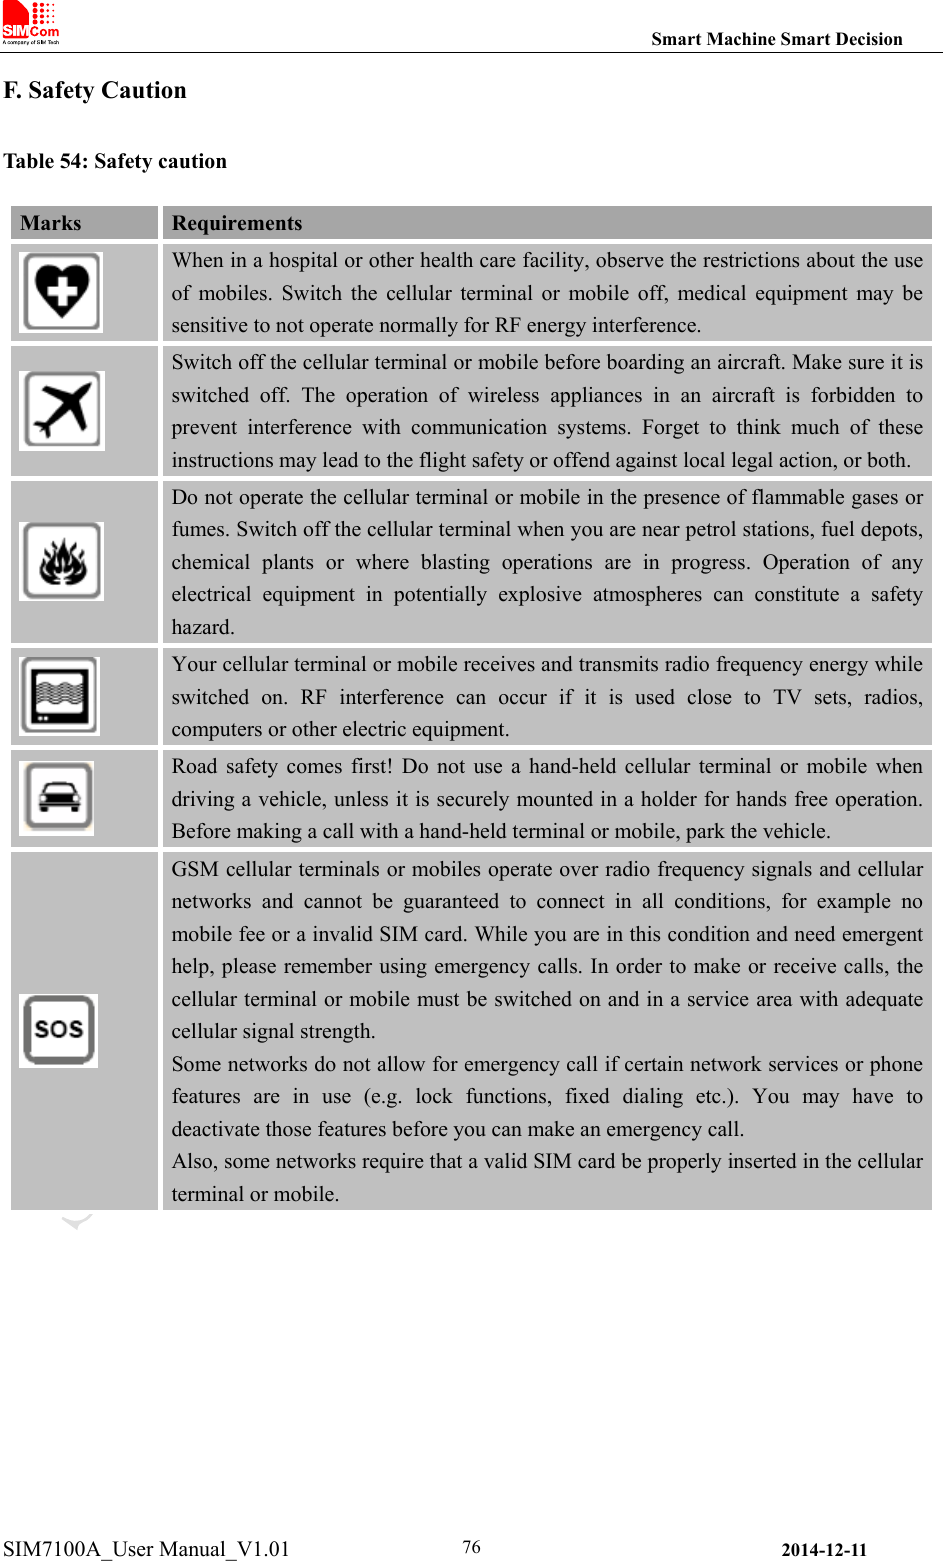                                                                Smart Machine Smart Decision SIM7100A_User Manual_V1.01                2014-12-11 76F. Safety Caution Table 54: Safety caution Marks  Requirements  When in a hospital or other health care facility, observe the restrictions about the use of  mobiles.  Switch  the  cellular  terminal  or  mobile  off,  medical equipment may be sensitive to not operate normally for RF energy interference.  Switch off the cellular terminal or mobile before boarding an aircraft. Make sure it is switched  off.  The  operation  of  wireless  appliances  in  an  aircraft  is  forbidden  to prevent  interference  with  communication  systems.  Forget  to  think  much  of  these instructions may lead to the flight safety or offend against local legal action, or both.  Do not operate the cellular terminal or mobile in the presence of flammable gases or fumes. Switch off the cellular terminal when you are near petrol stations, fuel depots, chemical  plants  or  where  blasting  operations  are  in  progress.  Operation  of  any electrical  equipment  in  potentially  explosive  atmospheres  can  constitute  a  safety hazard.  Your cellular terminal or mobile receives and transmits radio frequency energy while switched  on.  RF  interference  can  occur  if  it  is  used  close  to  TV  sets,  radios, computers or other electric equipment.  Road  safety  comes  first!  Do  not  use  a  hand-held cellular  terminal or mobile when driving a vehicle, unless it is securely mounted in a holder for hands free operation. Before making a call with a hand-held terminal or mobile, park the vehicle.  GSM cellular terminals or mobiles operate over radio frequency signals and cellular networks  and  cannot  be  guaranteed  to  connect  in  all  conditions, for example no mobile fee or a invalid SIM card. While you are in this condition and need emergent help, please remember using emergency calls. In order to make or receive calls, the cellular terminal or mobile must be switched on and in a service area with adequate cellular signal strength. Some networks do not allow for emergency call if certain network services or phone features  are  in  use  (e.g.  lock  functions,  fixed  dialing  etc.).  You  may  have  to deactivate those features before you can make an emergency call. Also, some networks require that a valid SIM card be properly inserted in the cellular terminal or mobile.       